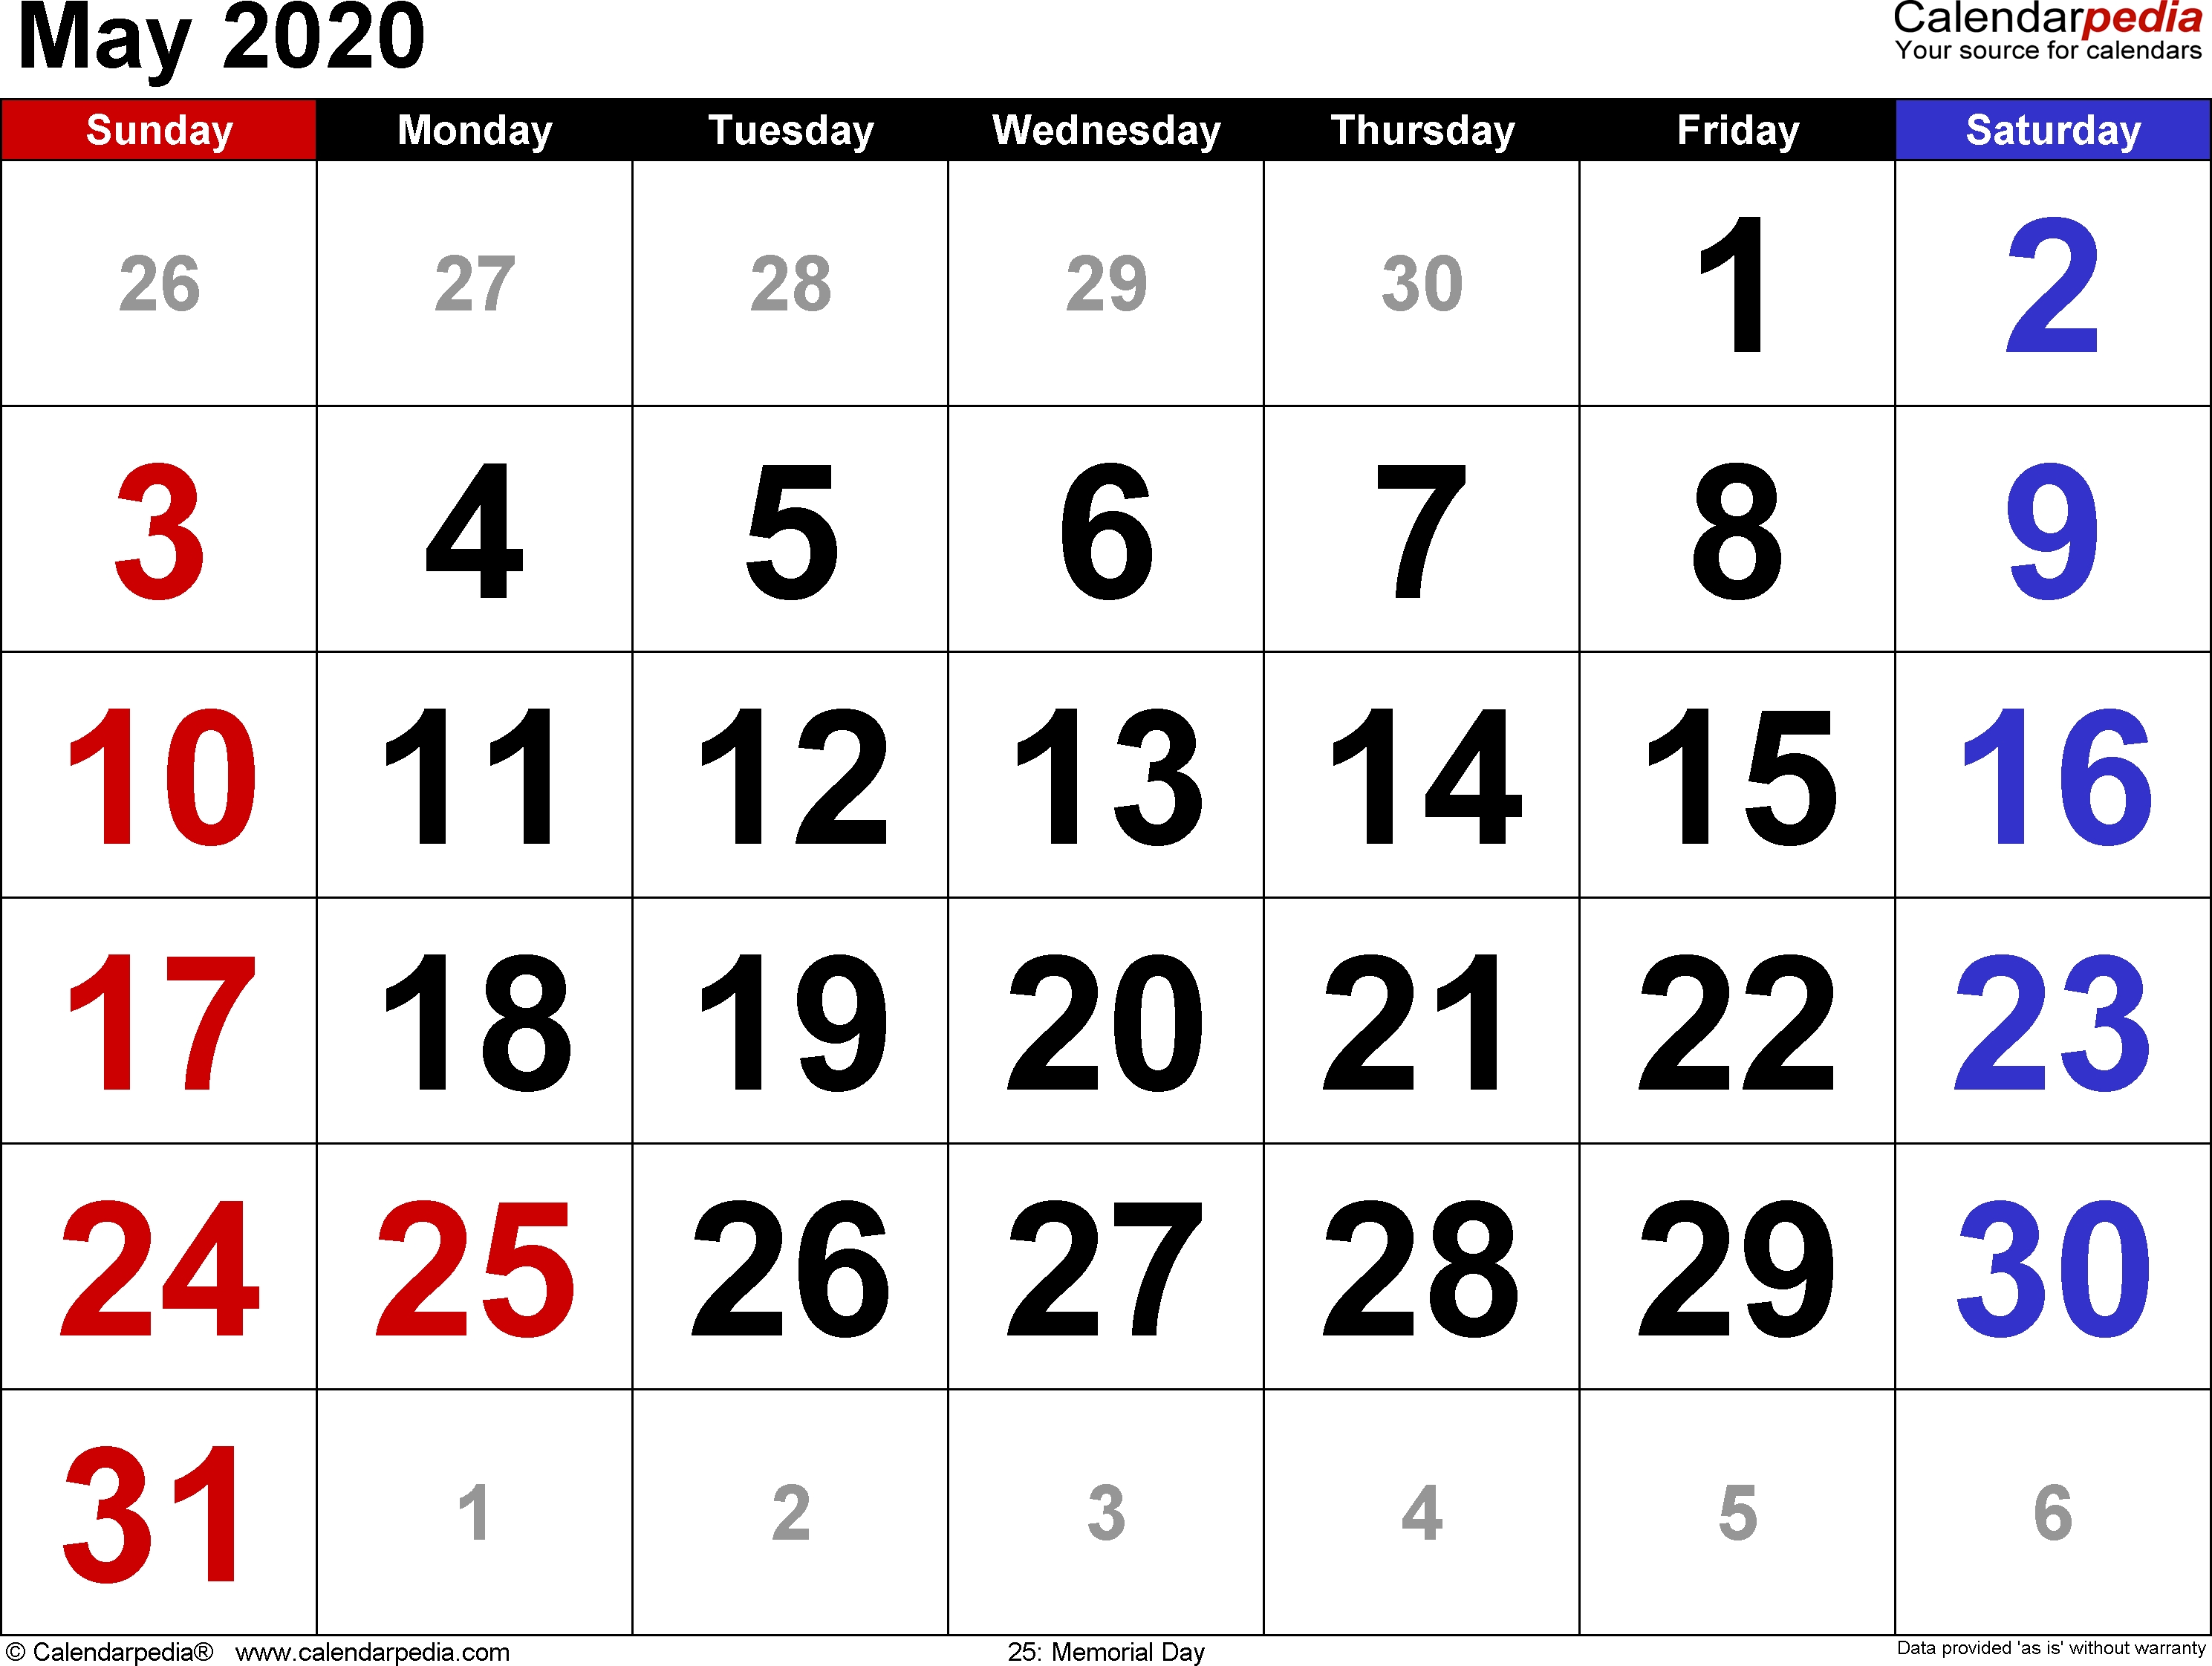 May 2020 - Calendar Templates For Word, Excel And Pdf May 1 2020 Calendar